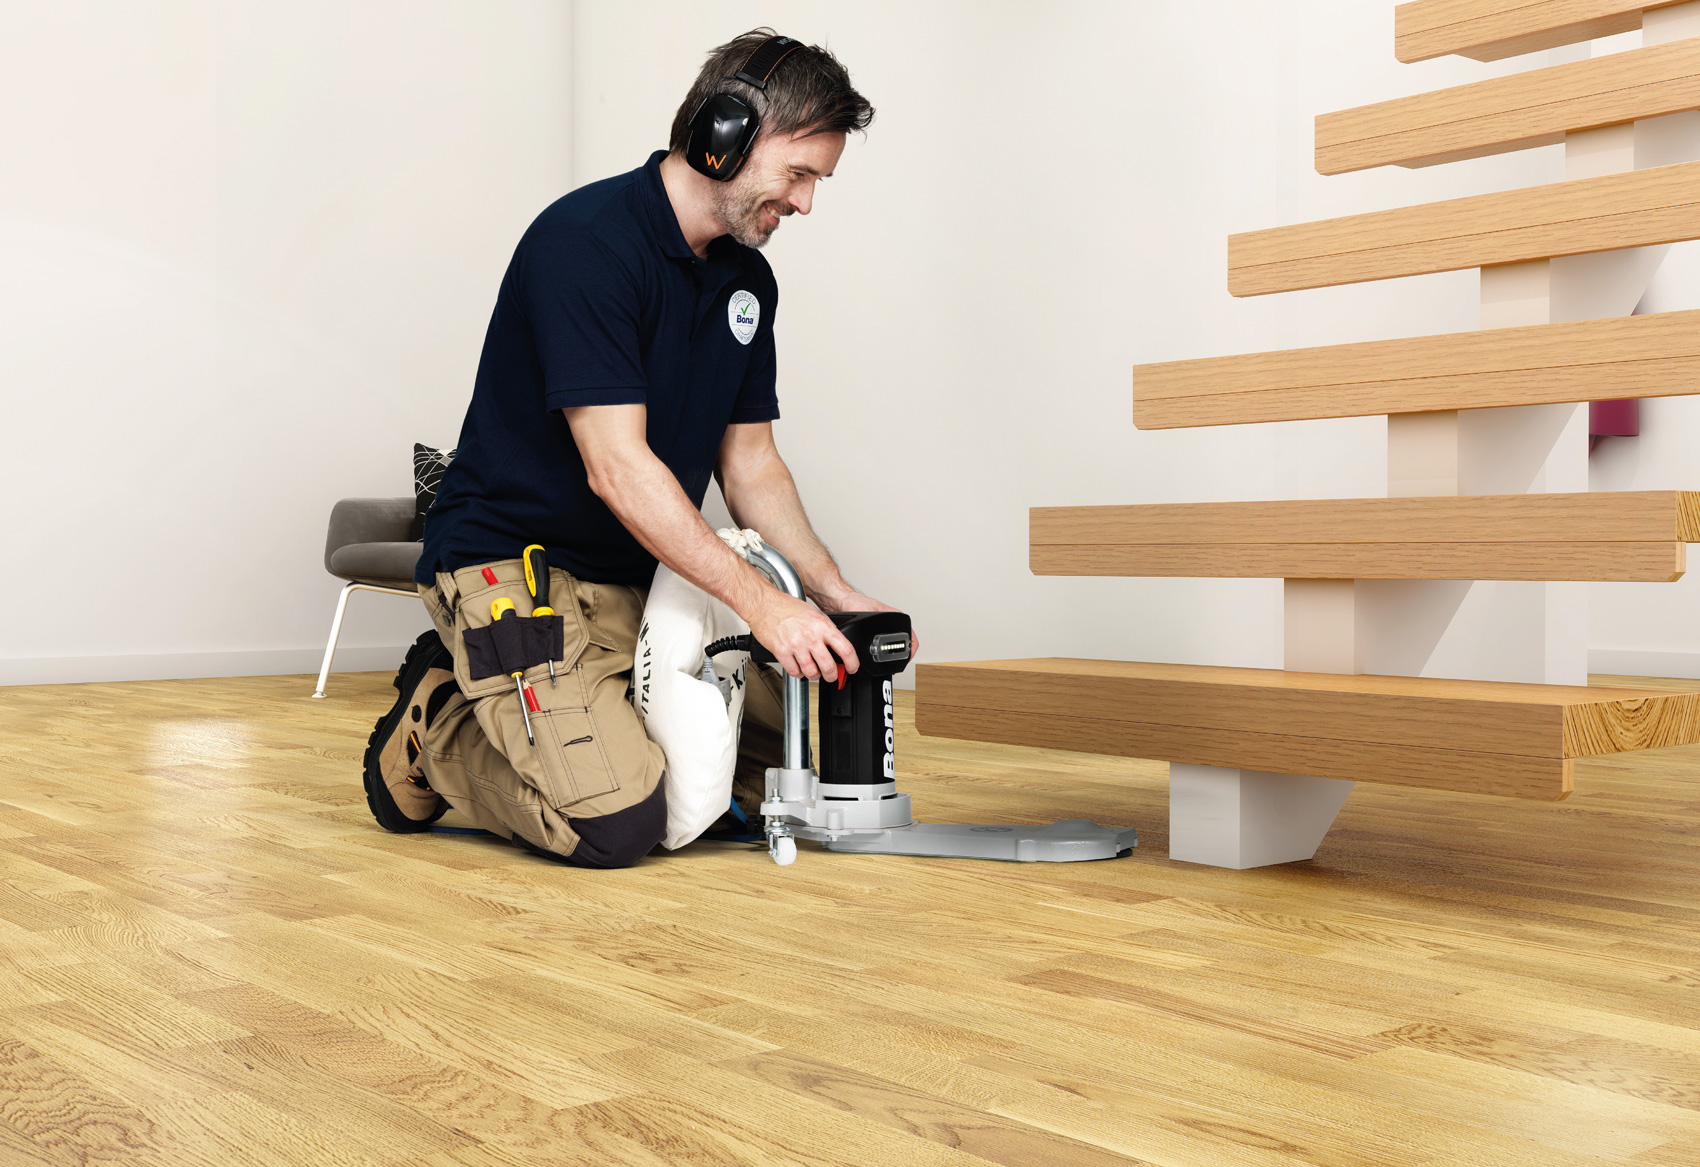 Bona CombiEdge, Highly Manoeuvrable with High Sanding & Working Speed